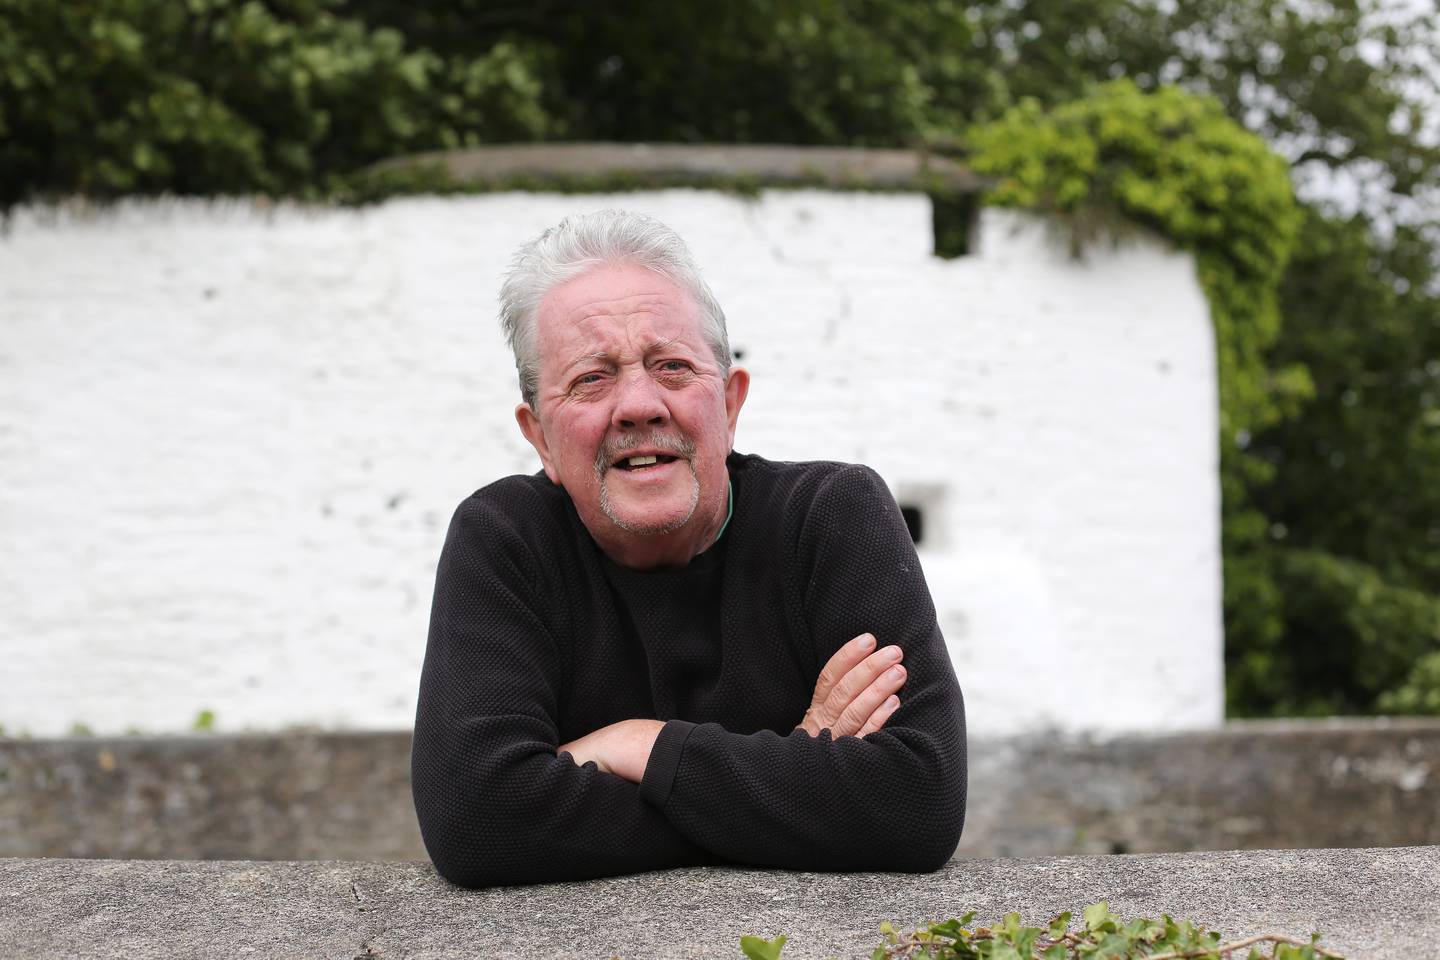 Caption: Gerry McLaughlin, 69, of Moville, Co Donegal, who is meeting with Pope Francis on Monday about being sexually abused at St Peter Claver College in Mirfield, West Yorkshire, a training school for Catholic priests, during the 1960s.